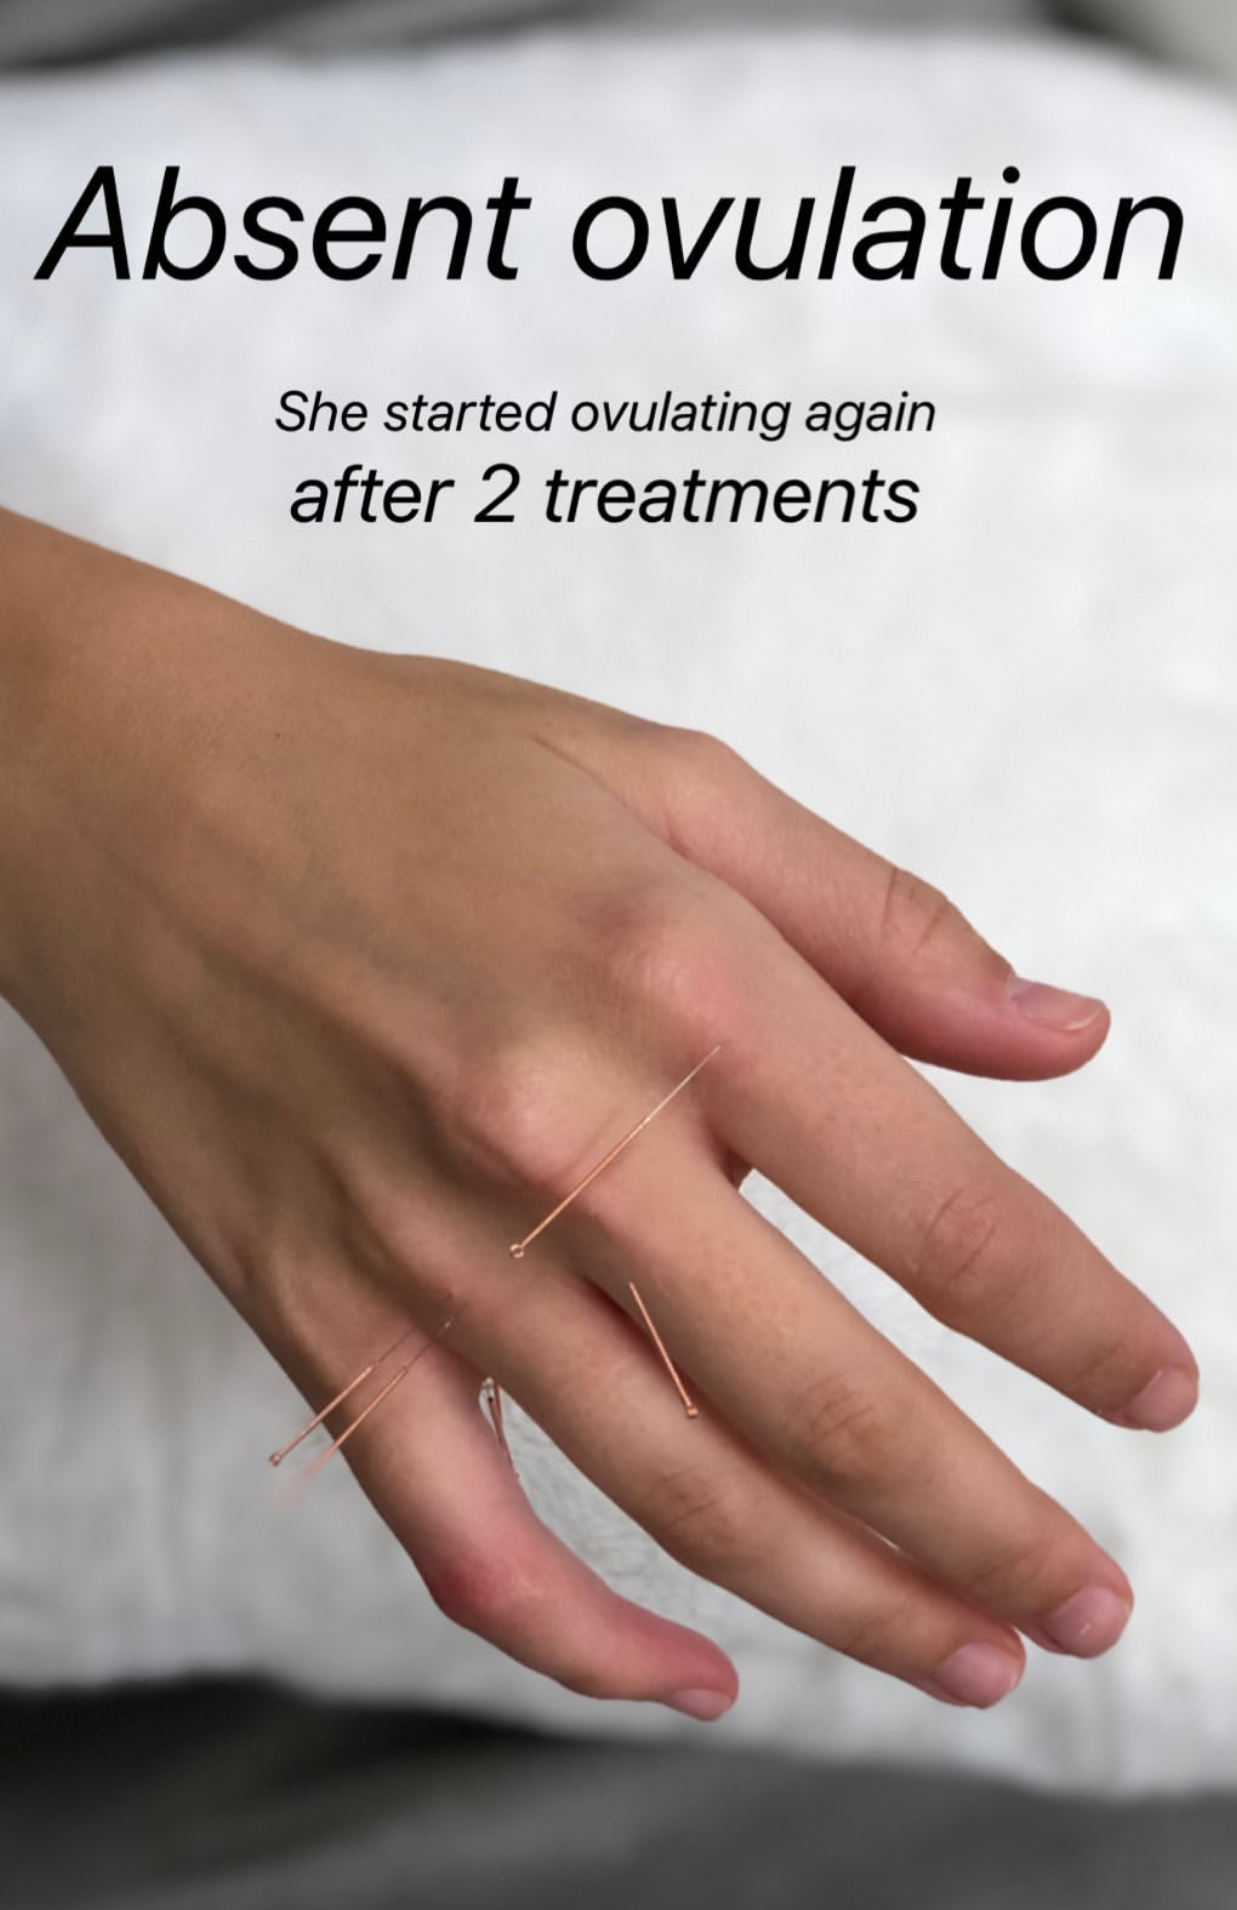  SuJok acupuncture in Vancouver used to treat fertility and reproductive health. Patient received treatment for absent ovulation, which resulted in her ovulation cycles to resume 